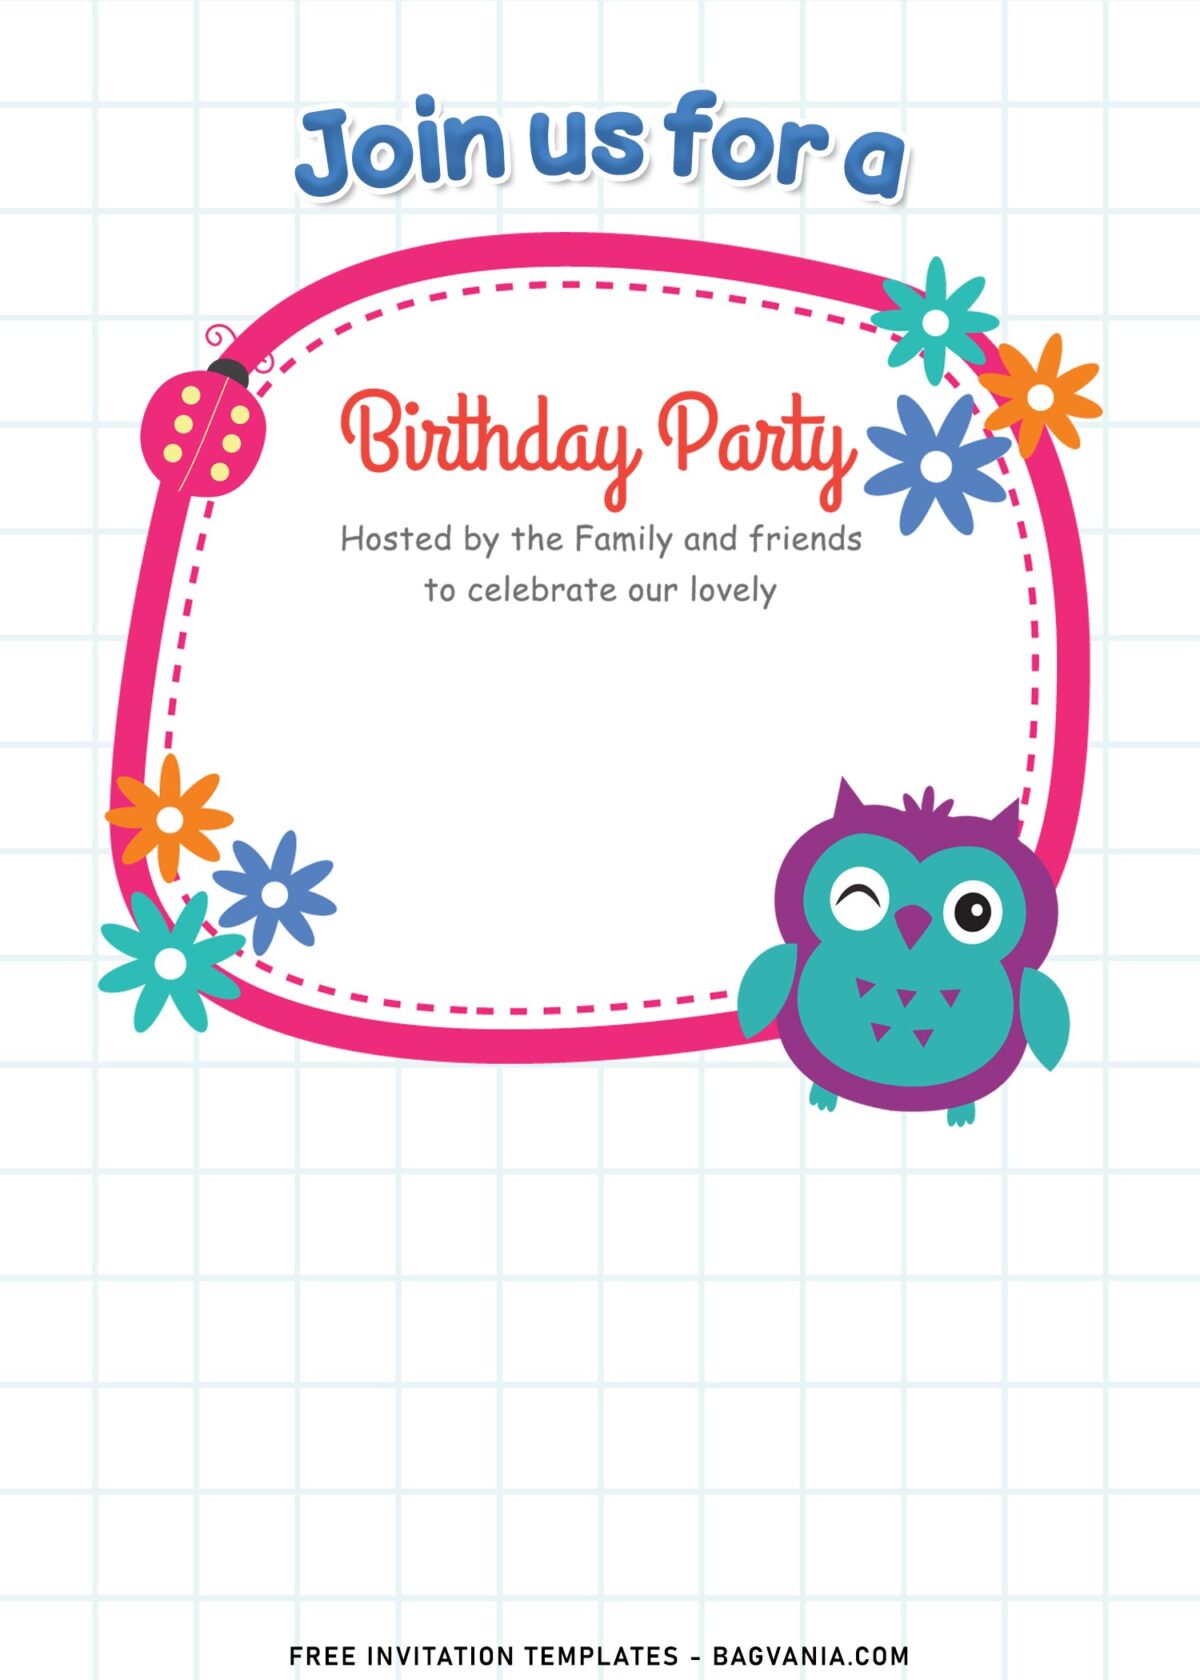 11+ Cute Owl Birthday Invitation Templates For Your Little Ones' Birthday with cute text frame